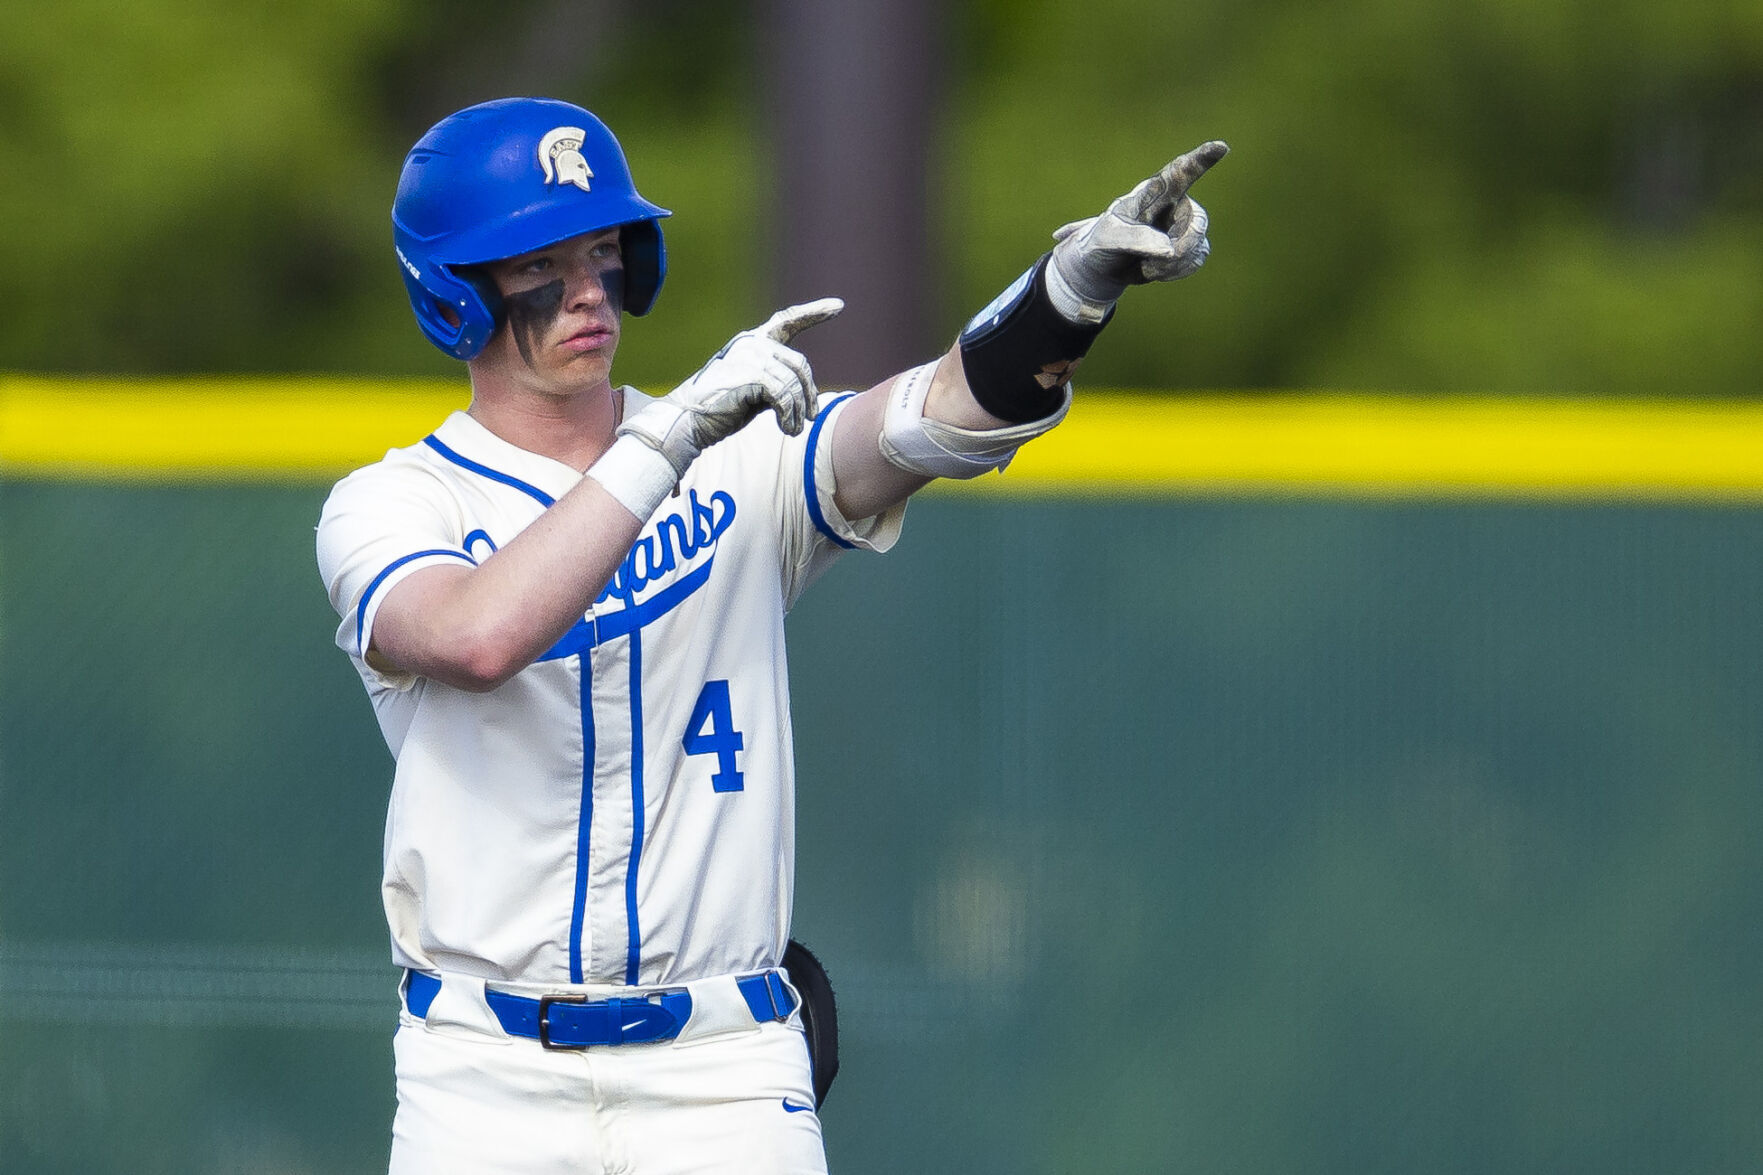 Lincoln East Baseball: Defending Champions with a Fiery Competitive Spirit